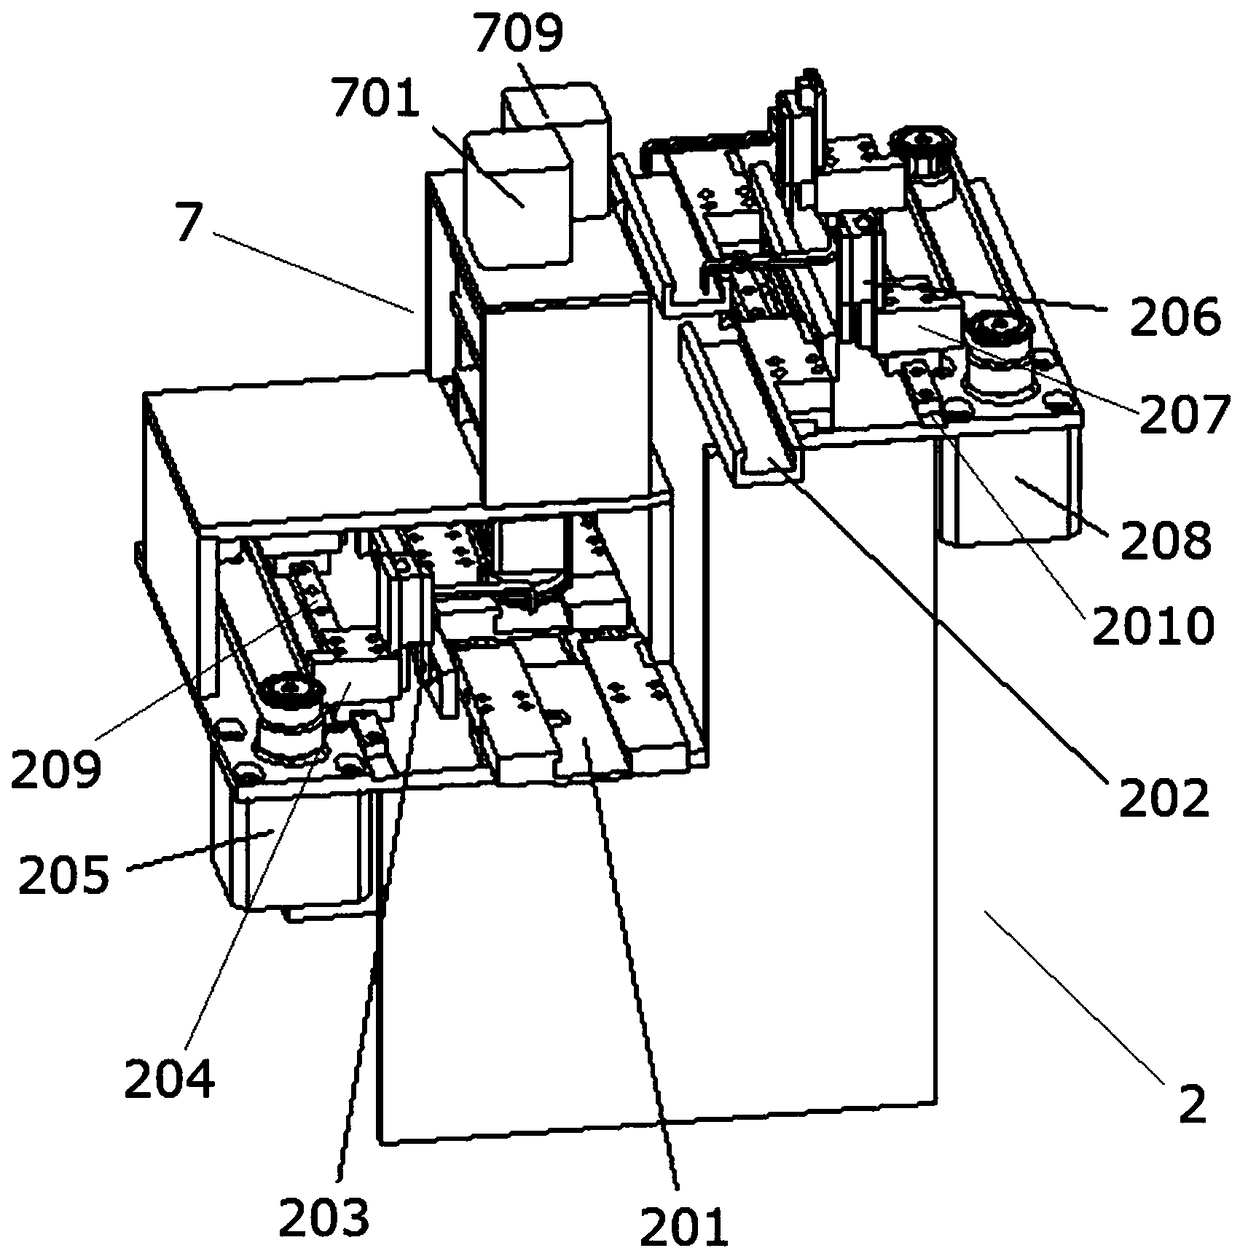 Sample injection module used for micro-fluidic chip and NC membrane multi-throughput detection